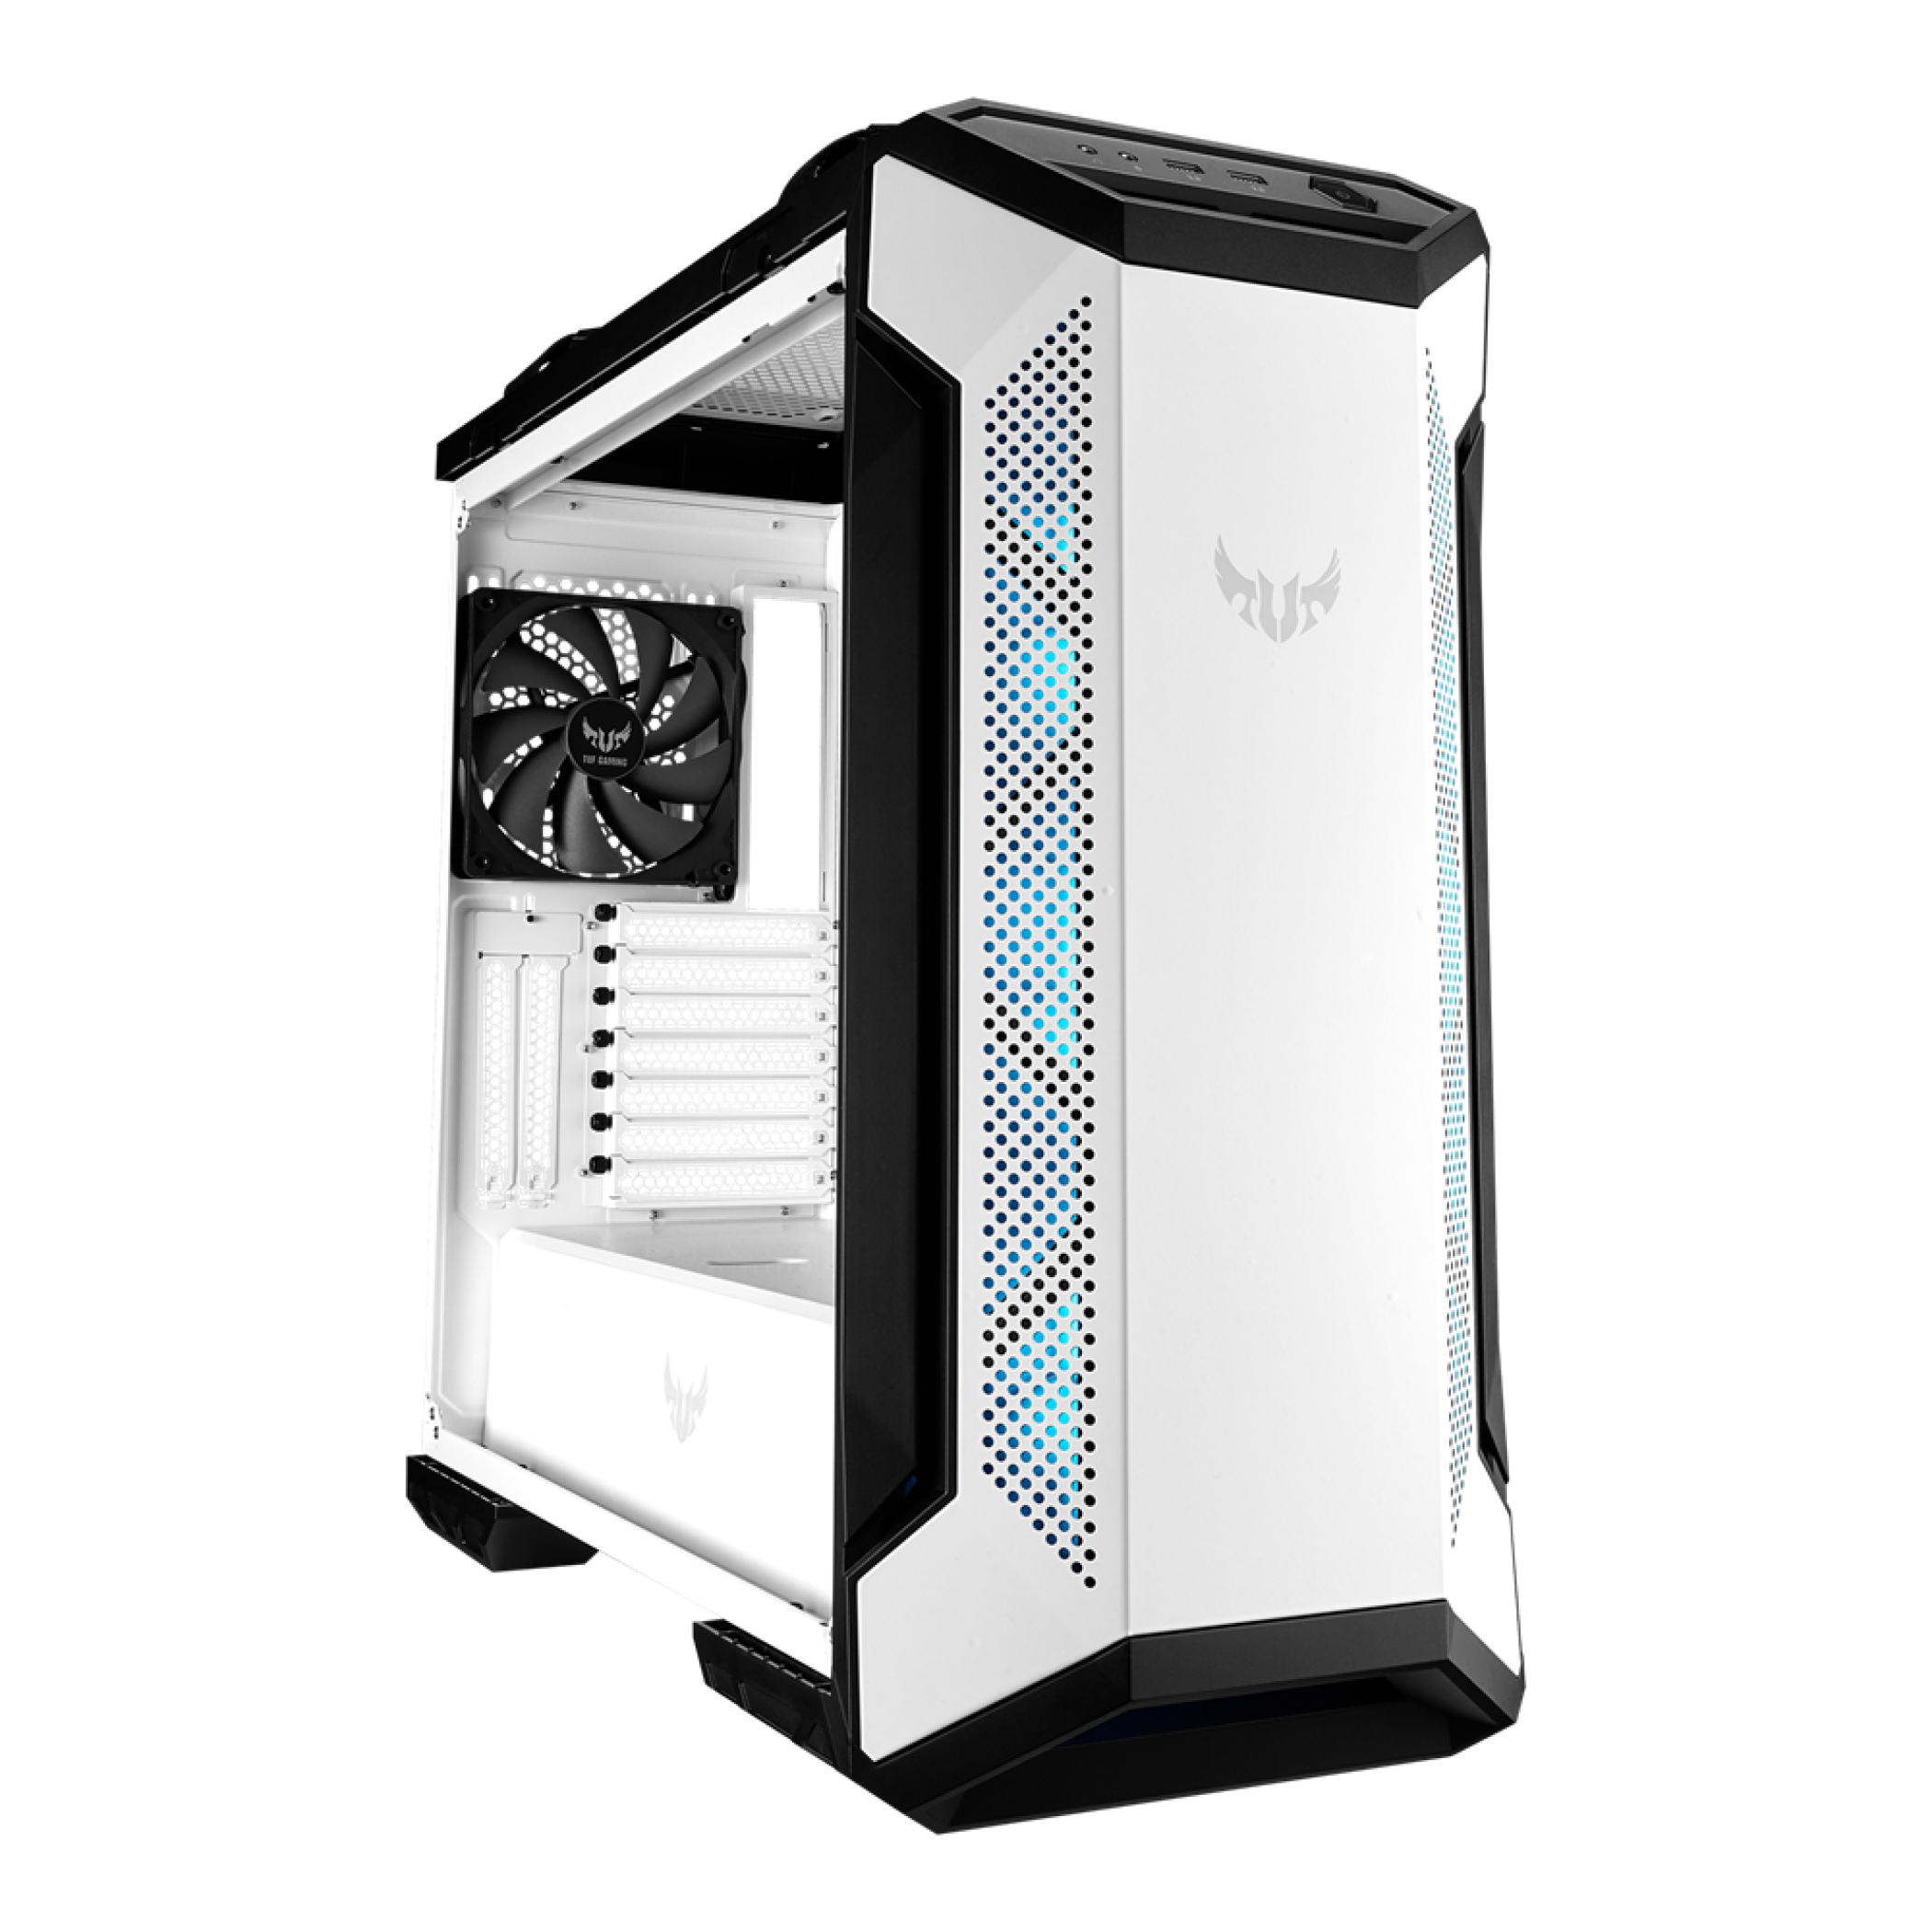 The Asus TUF Gaming GT501 White PC case.